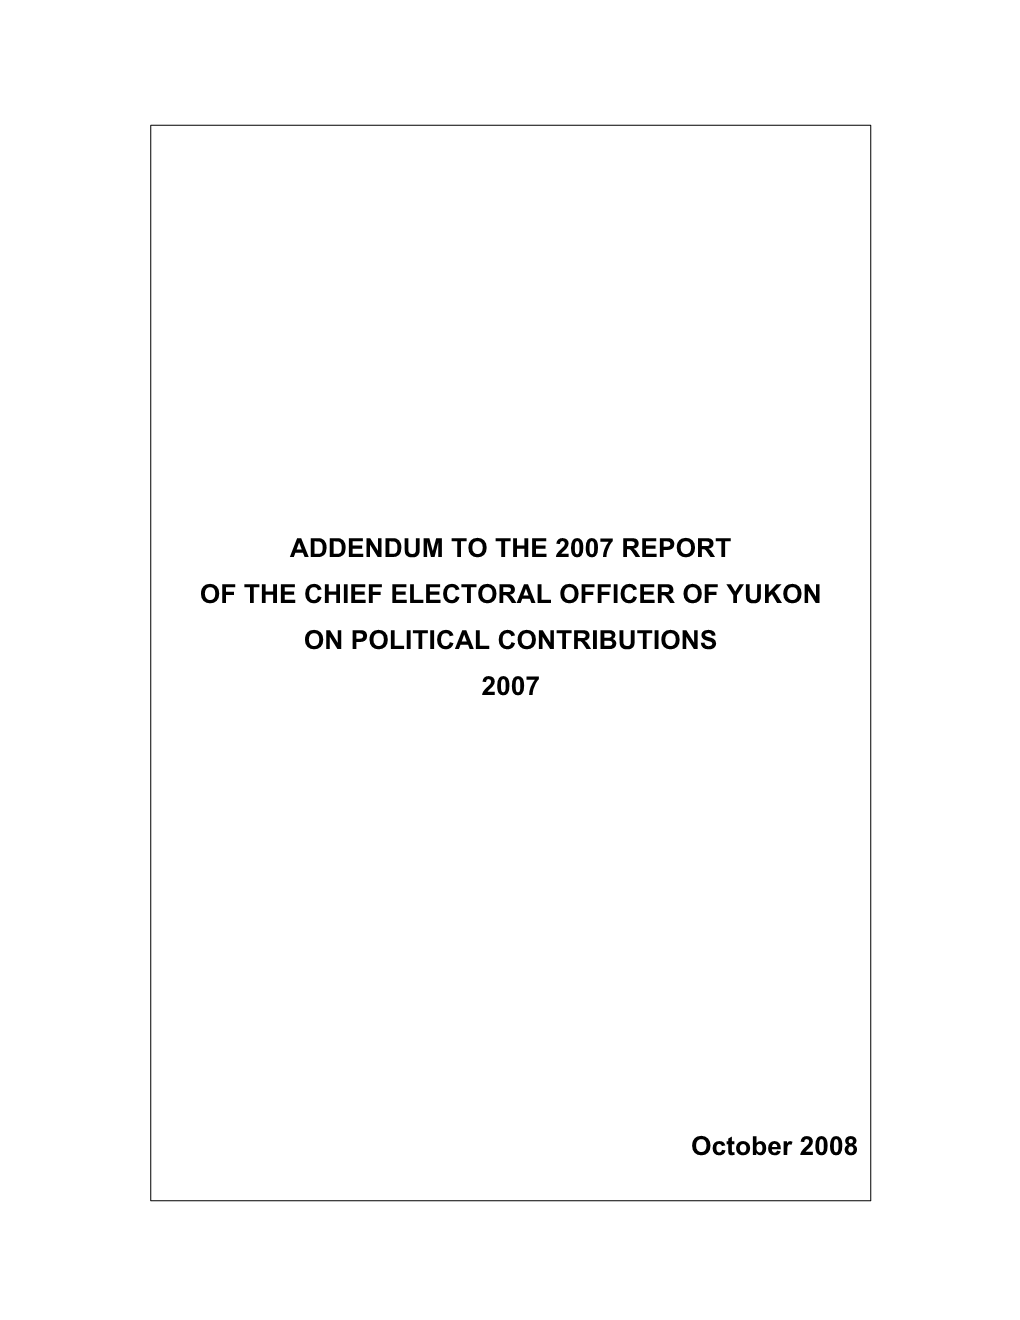 Addendum to the 2007 Report of the Chief Electoral Officer of Yukon on Political Contributions 2007